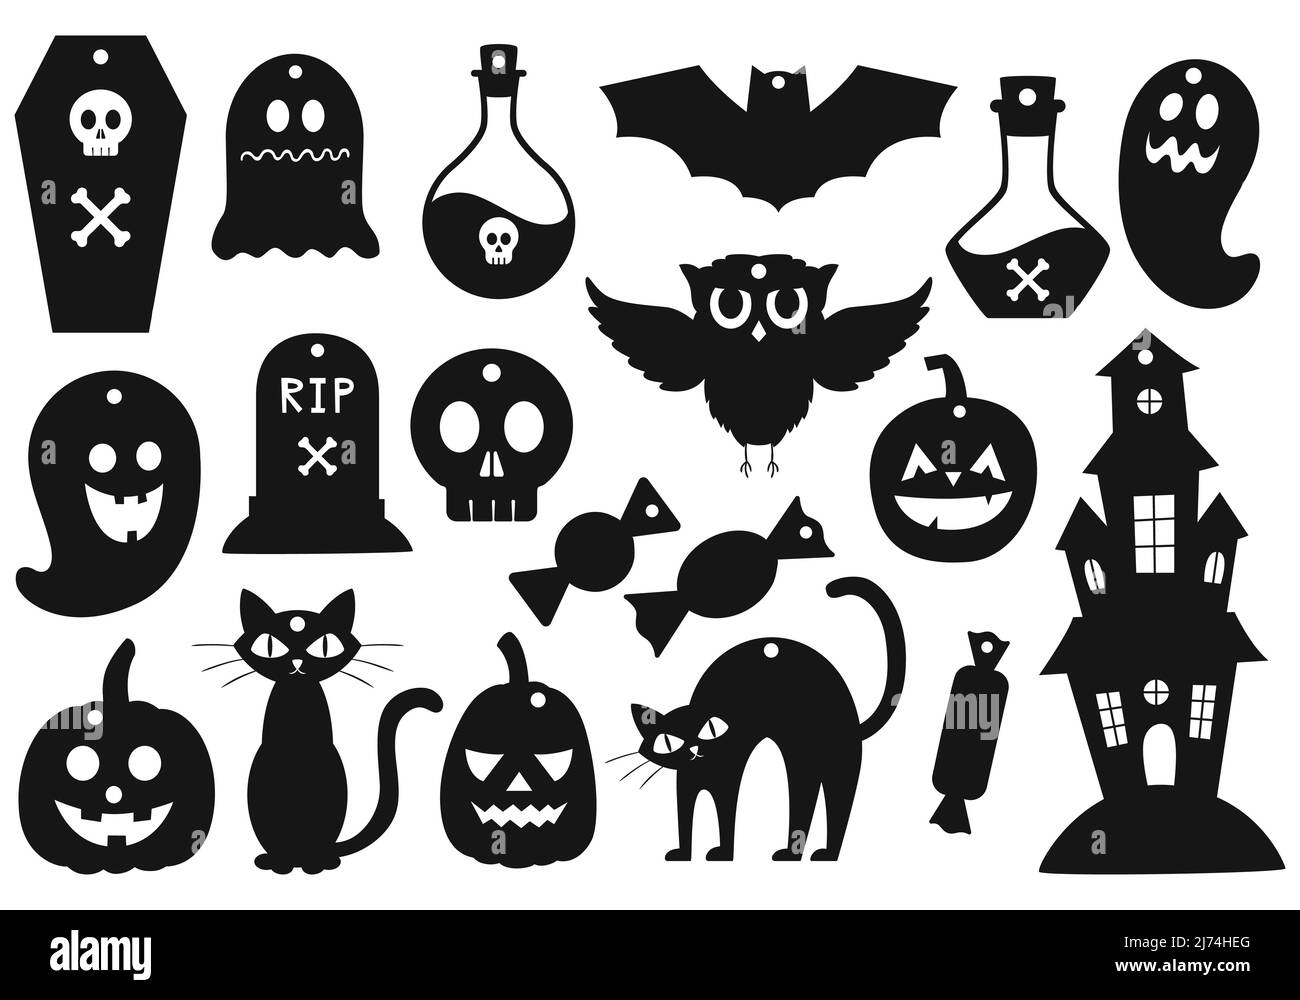 A set of simple gift tags. Black silhouettes of Halloween symbols. Pumpkin lantern, haunted house, bat, potion, gravestone, cat, candy. Simple flat ve Stock Vector